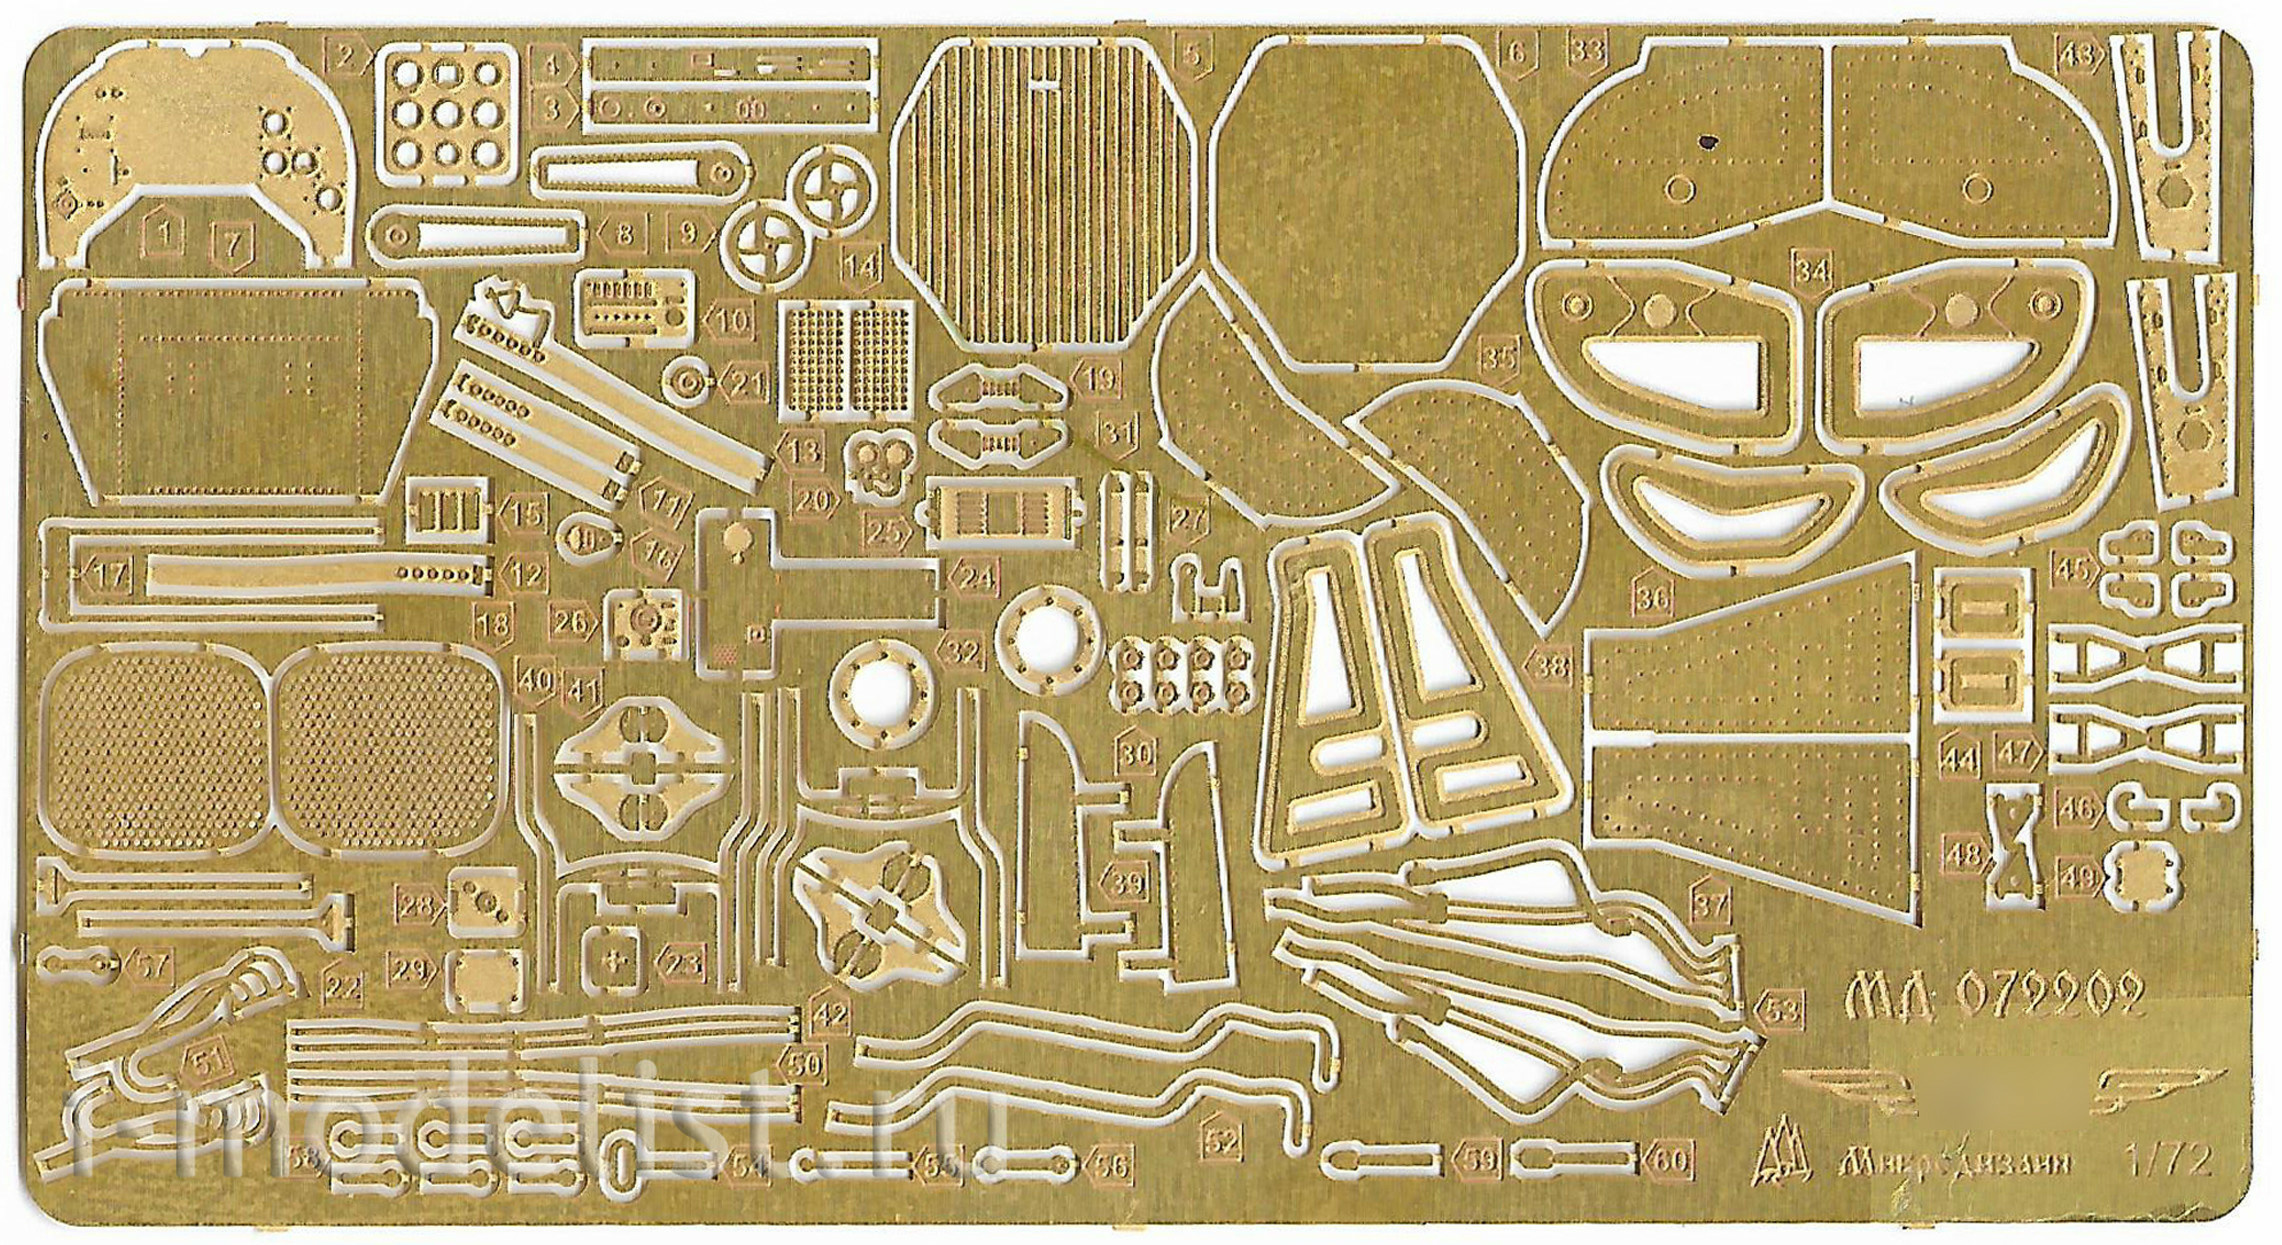 072202 Microdesign 1/72 photo etched parts for the Yakovlev-3 